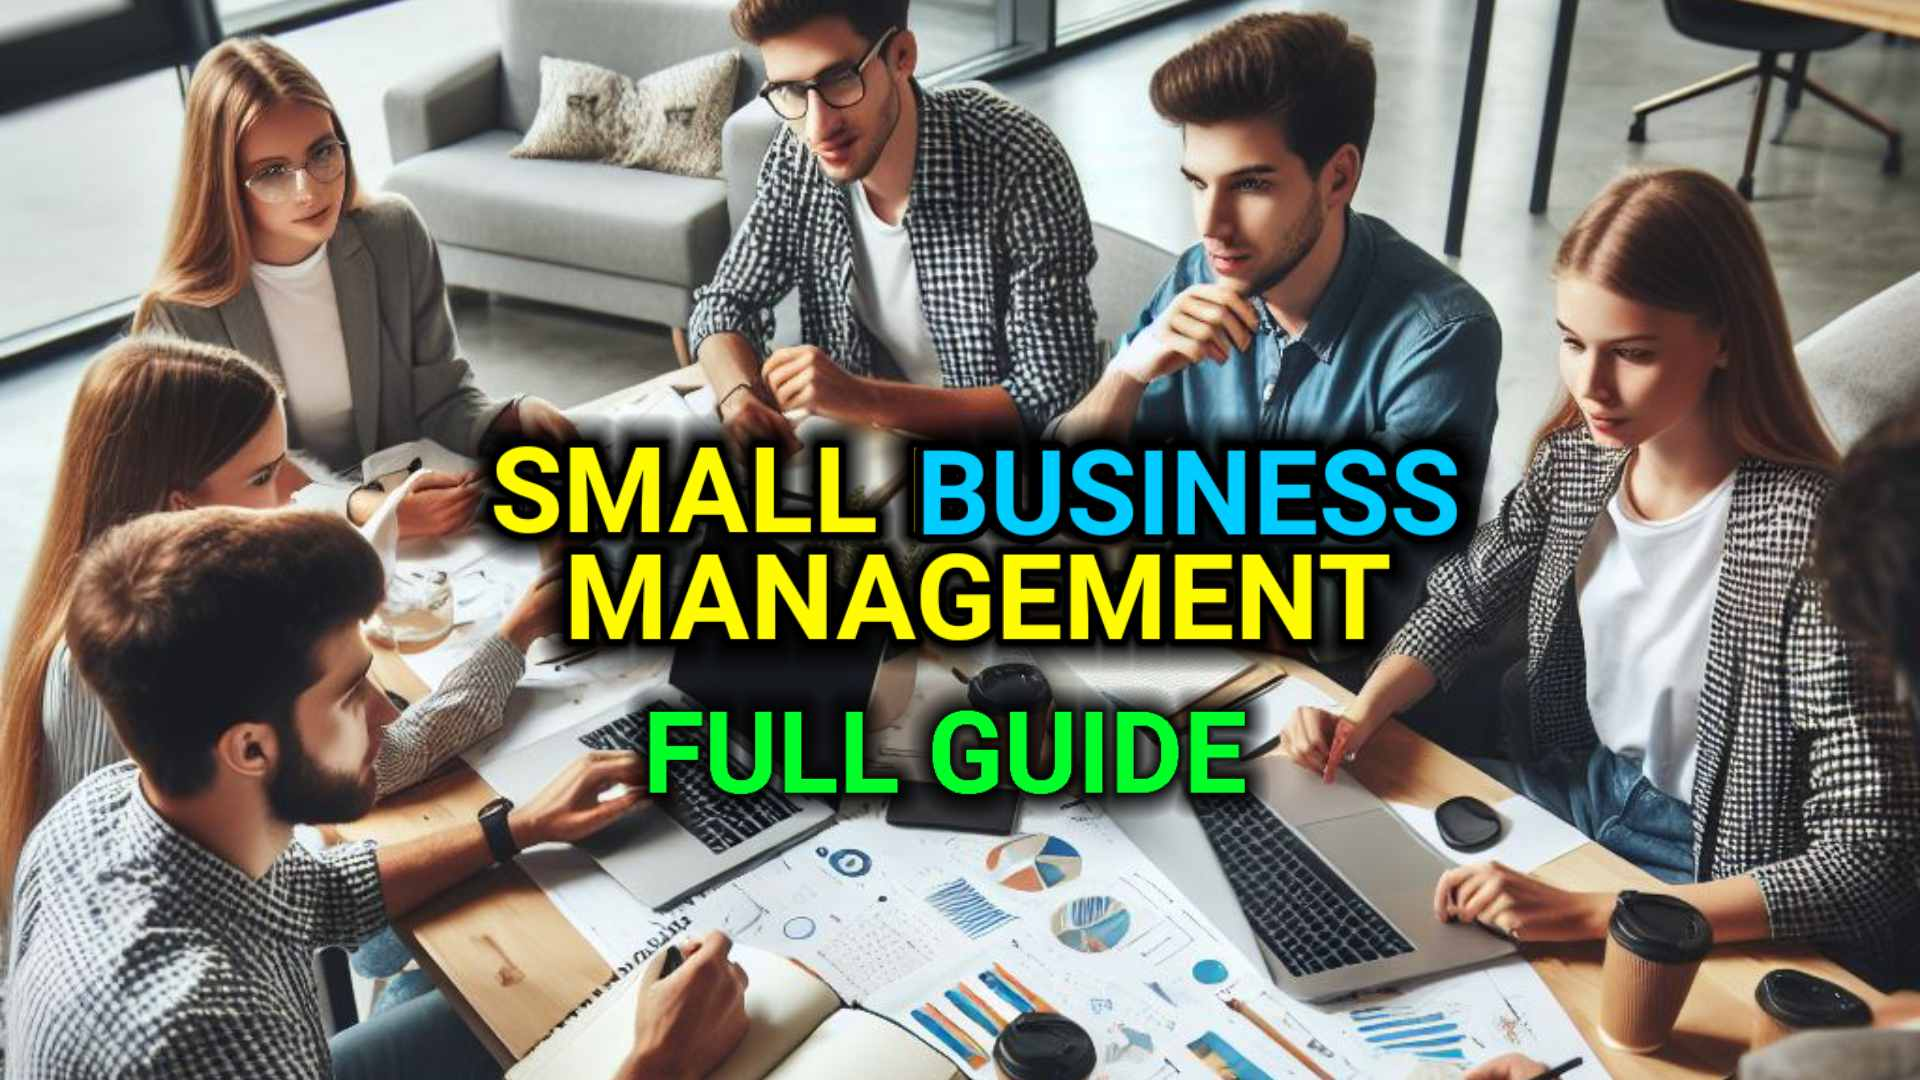 Small business management book